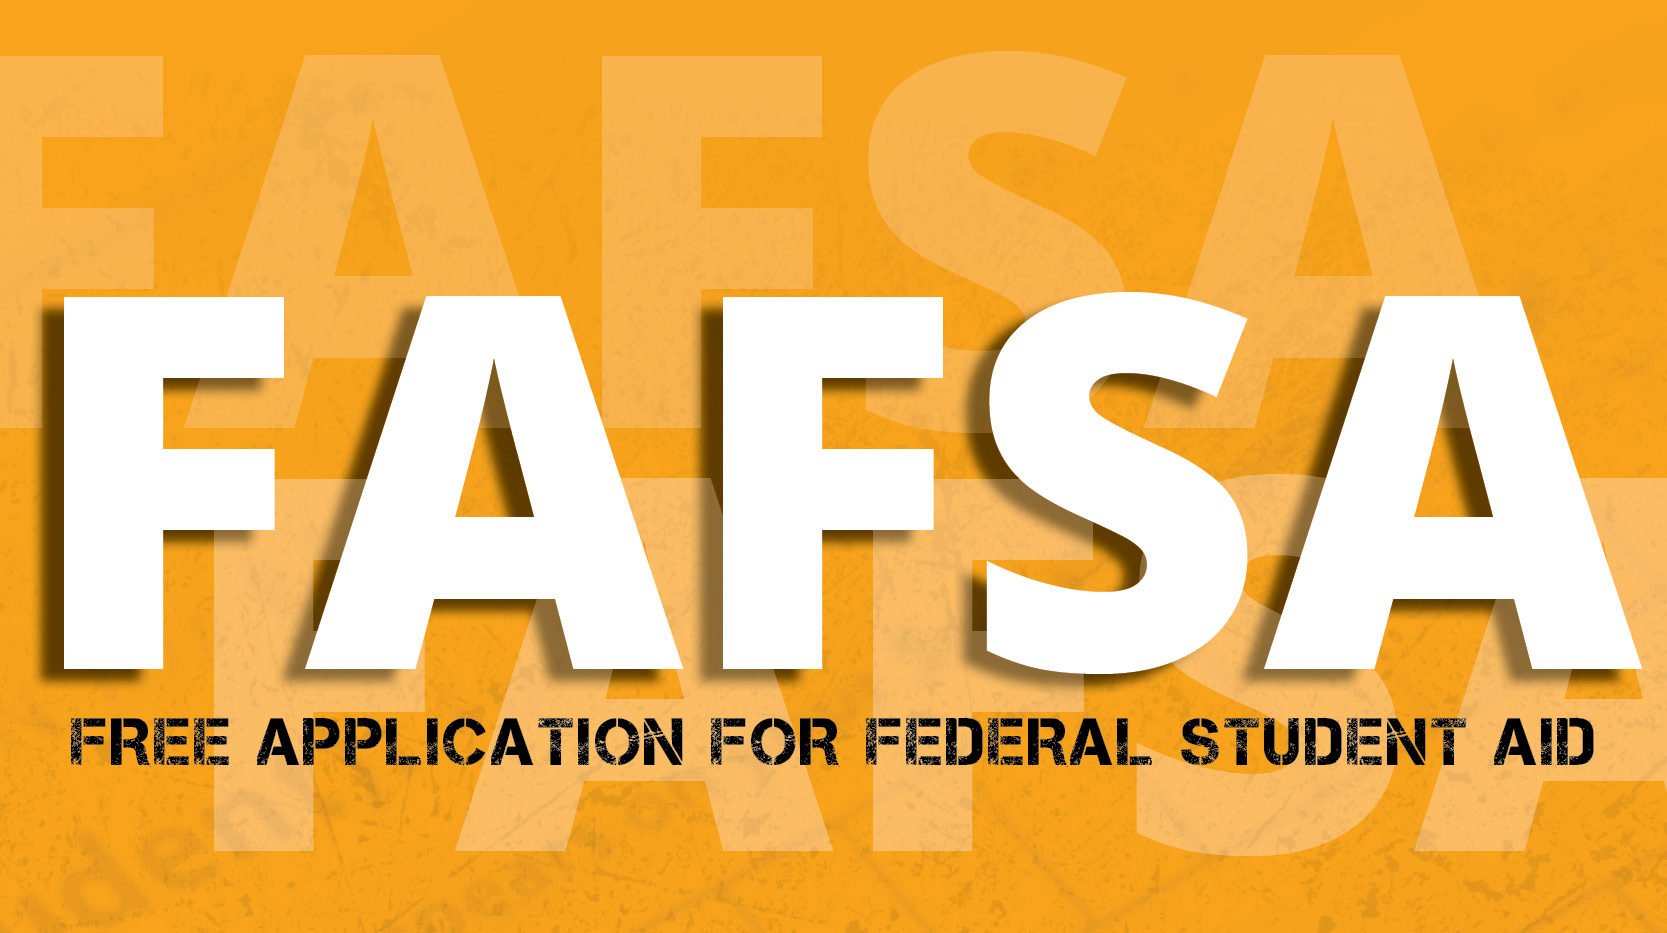 Read more about SFCC to host 3 free FAFSA Frenzy events